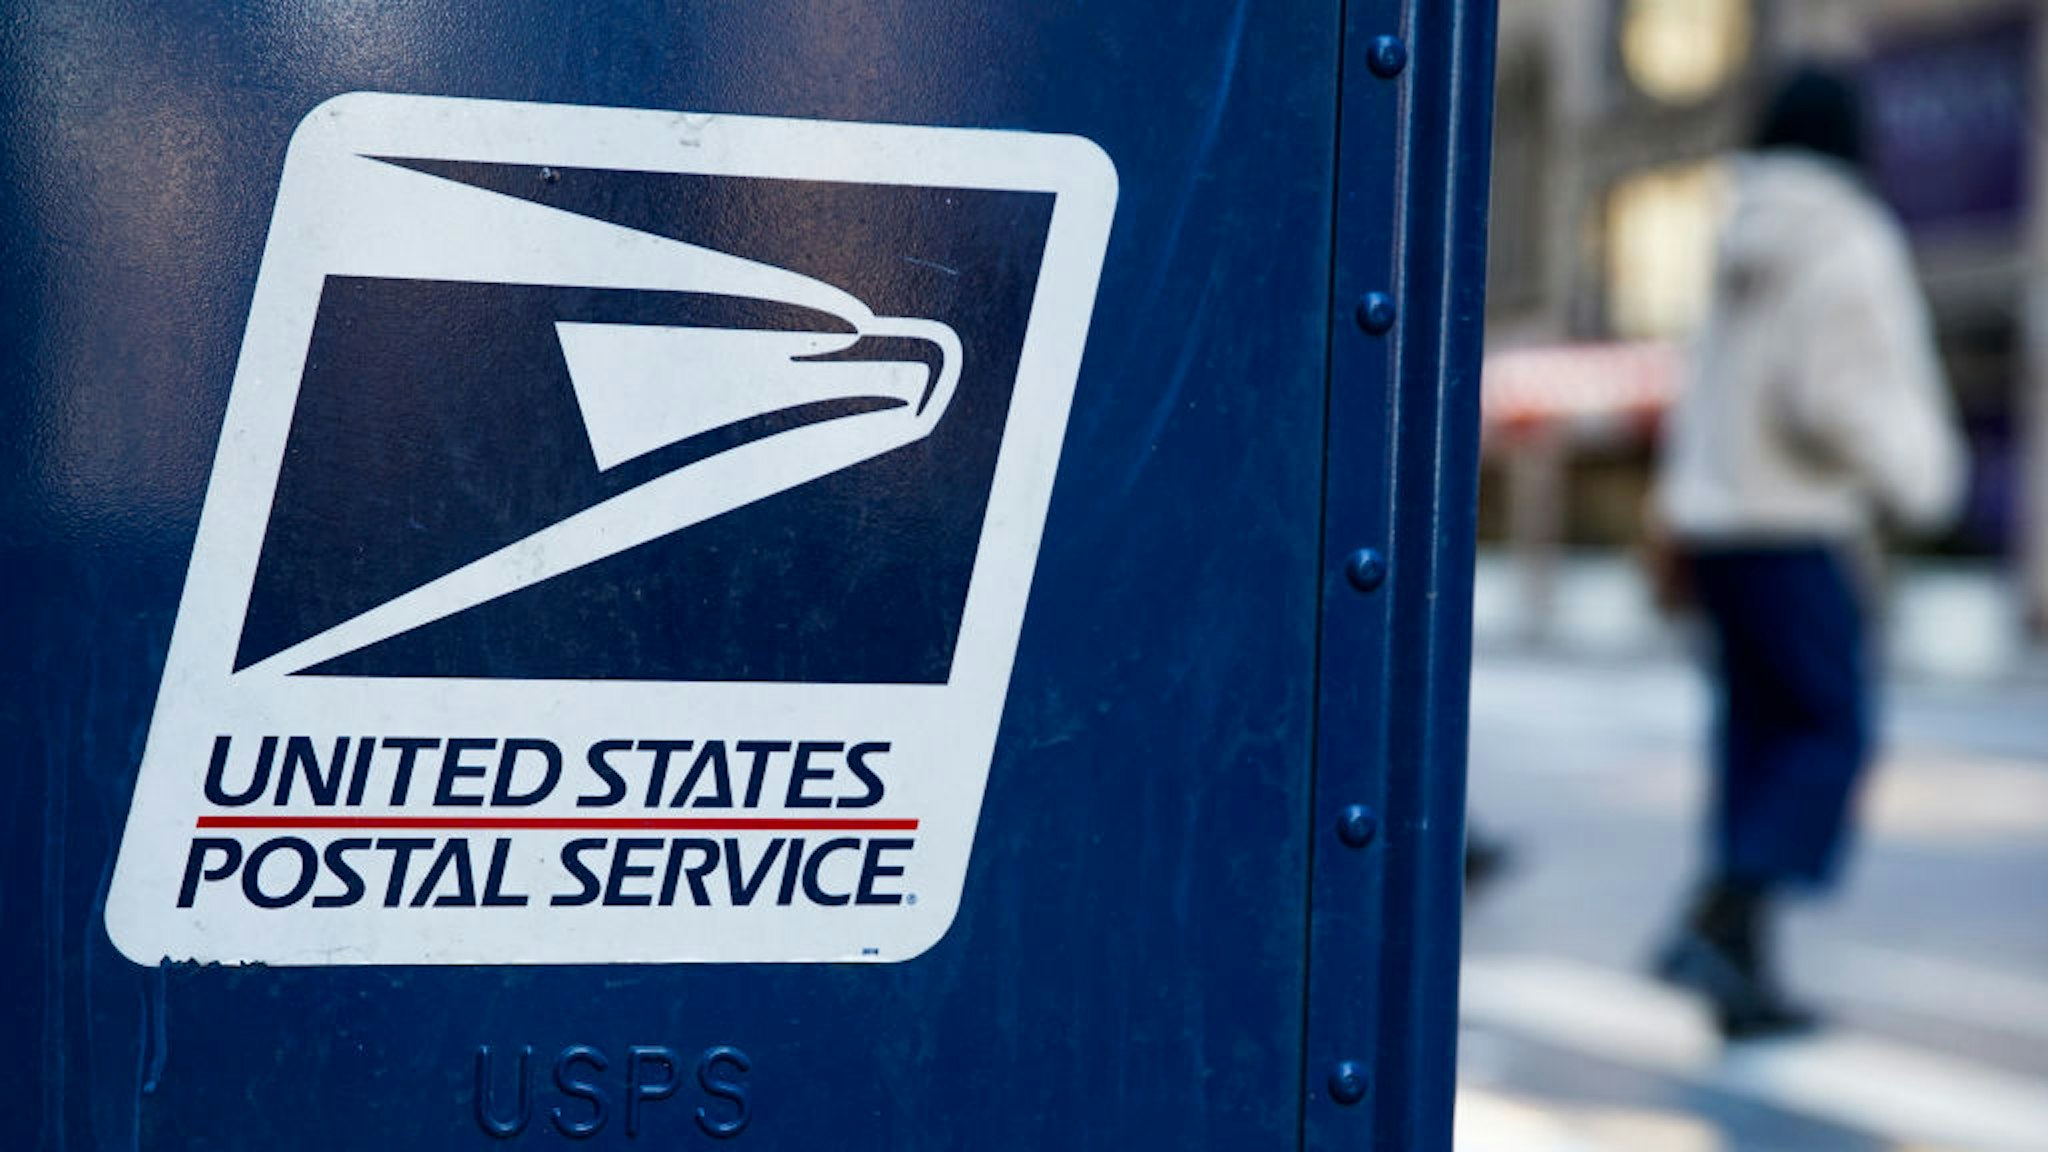 NEW YORK, NEW YORK - FEBRUARY 24: A USPS logo is seen on a mailbox on February 24, 2021, in New York City. The U.S Postal Service awarded a 10-year multi-billion dollar contract to Wisconsin-based Oshkosh Defense to replace its vehicles. (Photo by John Smith/VIEWpress via Getty Images)